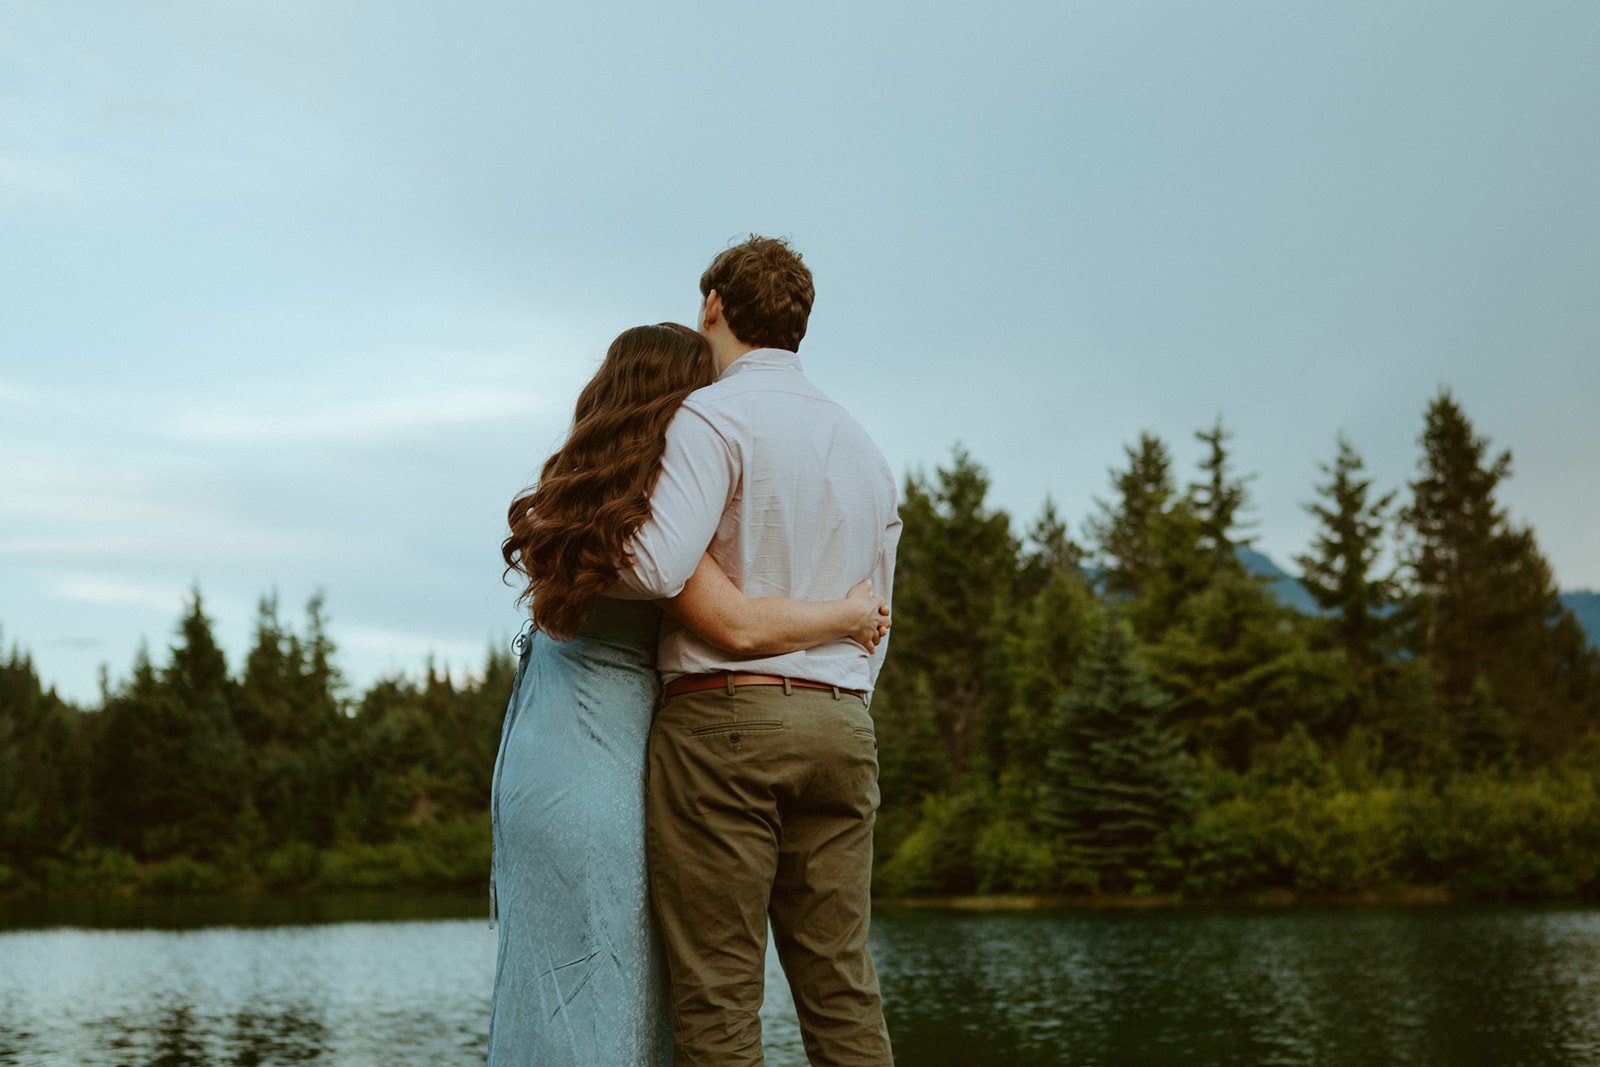 A Gold Creek Pond Outdoor Engagement Session - Shanean + Ian (61).jpg